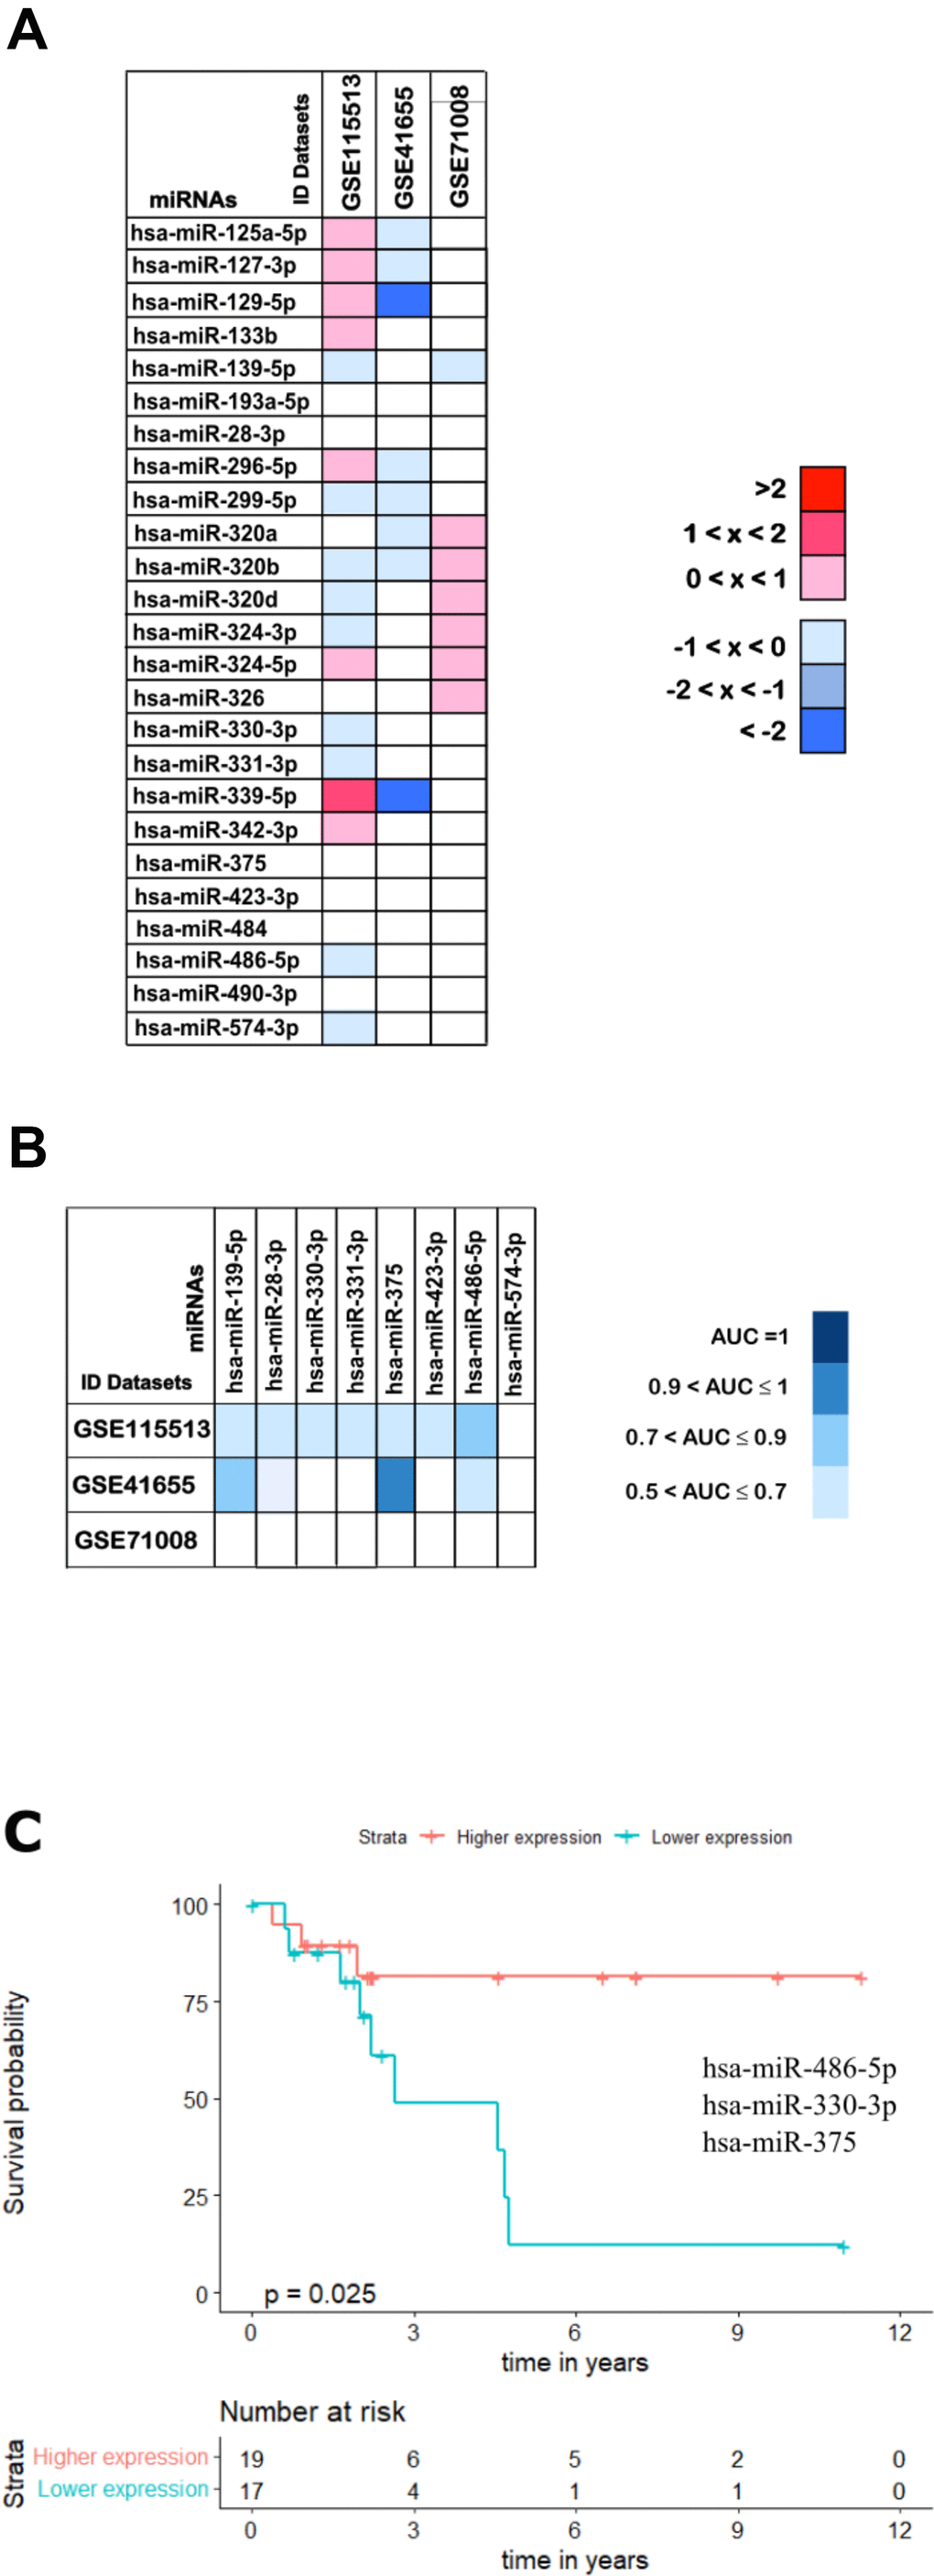 Validation analysis for the 25 downregulated miRNAs in CRC. (A) The log2(FC) values calculated for each dataset are reported with red scale boxes for upregulated miRNAs and blue scale boxes for the downregulated miRNAs. White boxes represent the inexistence of the miRNA on the dataset. (B) The miRNAs AUC values in each of the datasets GSE115513, GSE41655 and GSE71008 are reported as blue scale boxes. MiRNAs with AUC = 1 were considered perfect diagnostic biomarkers, 0.9 76]. (C) Stage III OS Kaplan-Meier curve based on miR-486-5p - miR-330-3p - miR-375 (p-value = 0.025, Log rank test; HR= 4.01). Time is represented in years. Higher (in red) and Lower (in blue) expression groups represent the group of patients with miRNA expression above and below miRNAs median expression, respectively. Censored data is represented by small plus signs in each group. The number of patients at risk for each group and per time point is shown in the table below each graph. HR, hazard ratio.